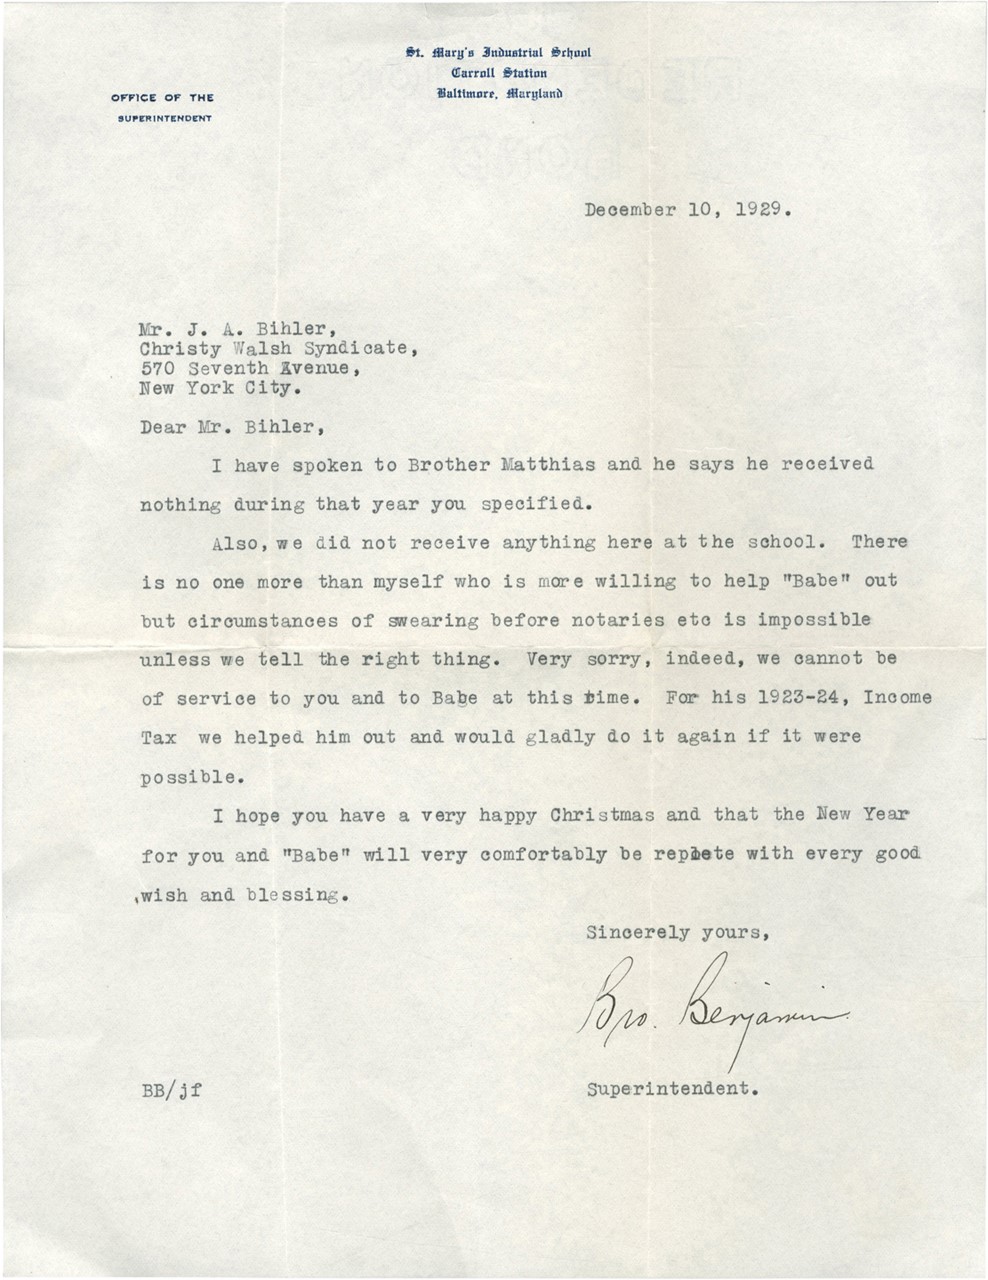 - 1929 St. Mary's Brother Mathias Won't Lie to Save Babe Ruth from Tax Problems Letter